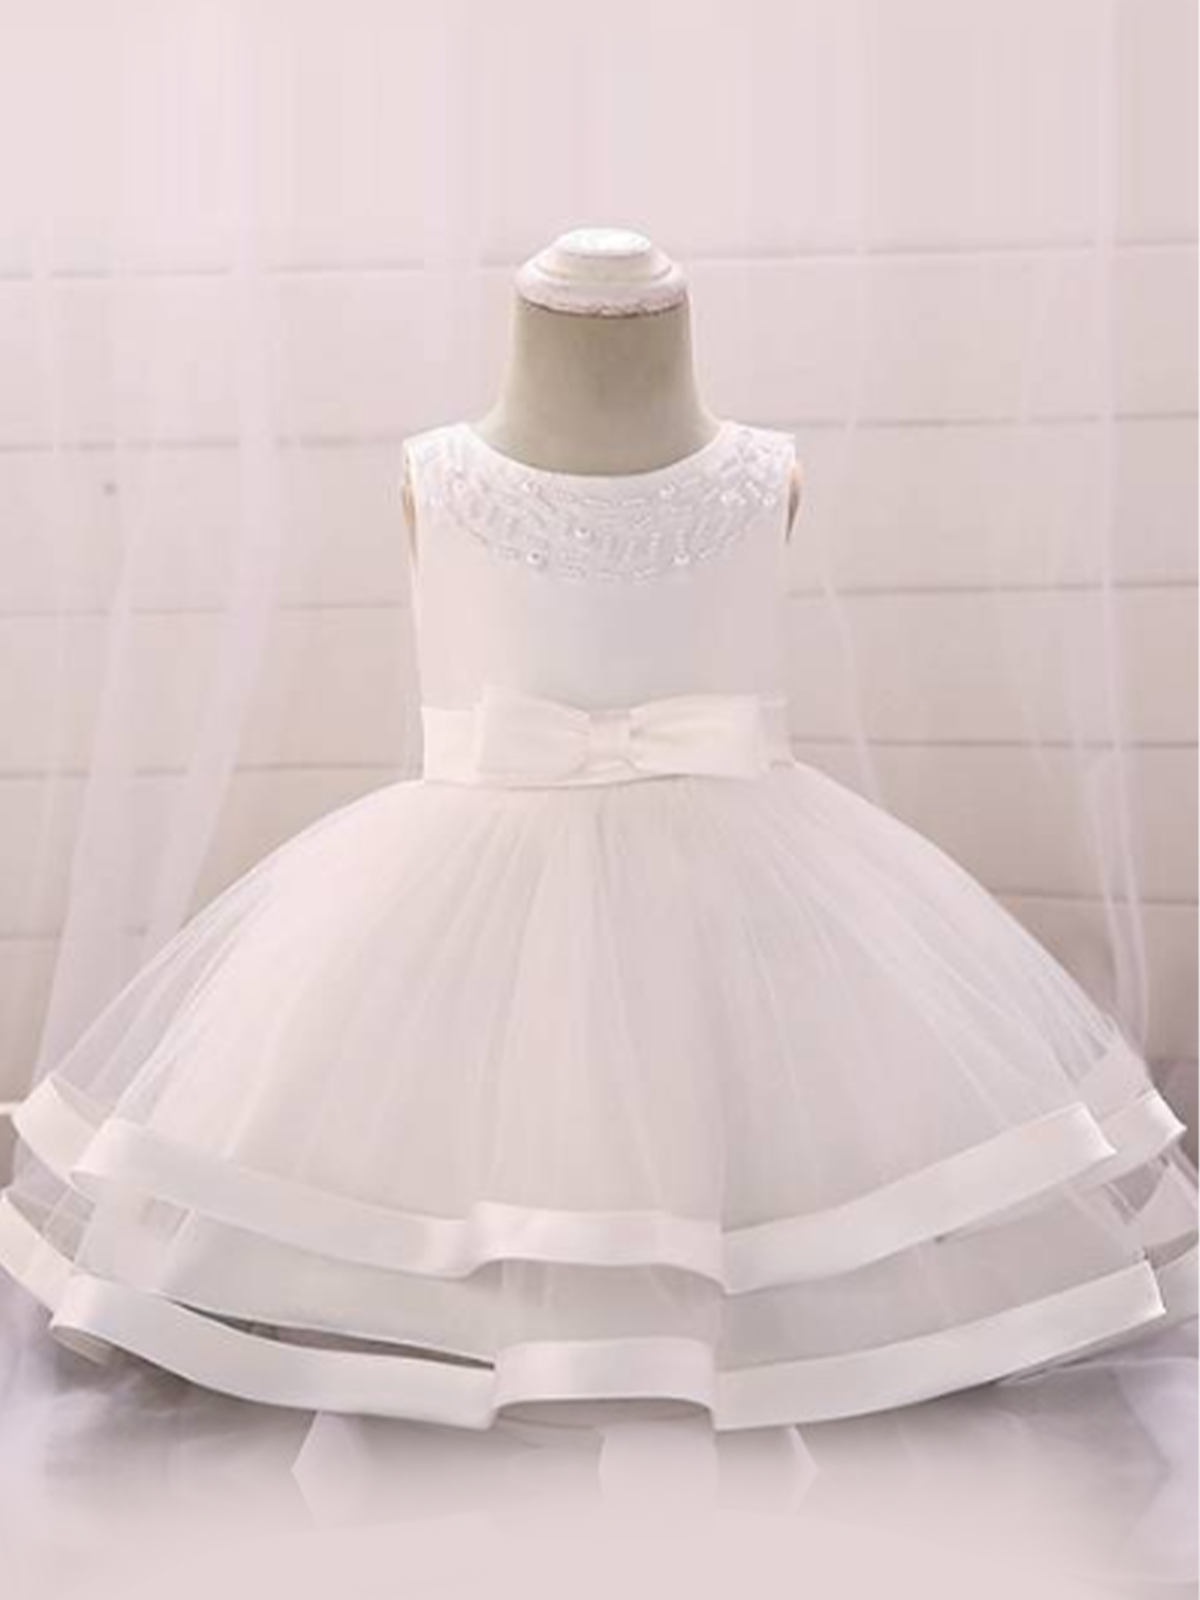 Baby dress features beautiful beads on the bodice, voile with satin hem-white